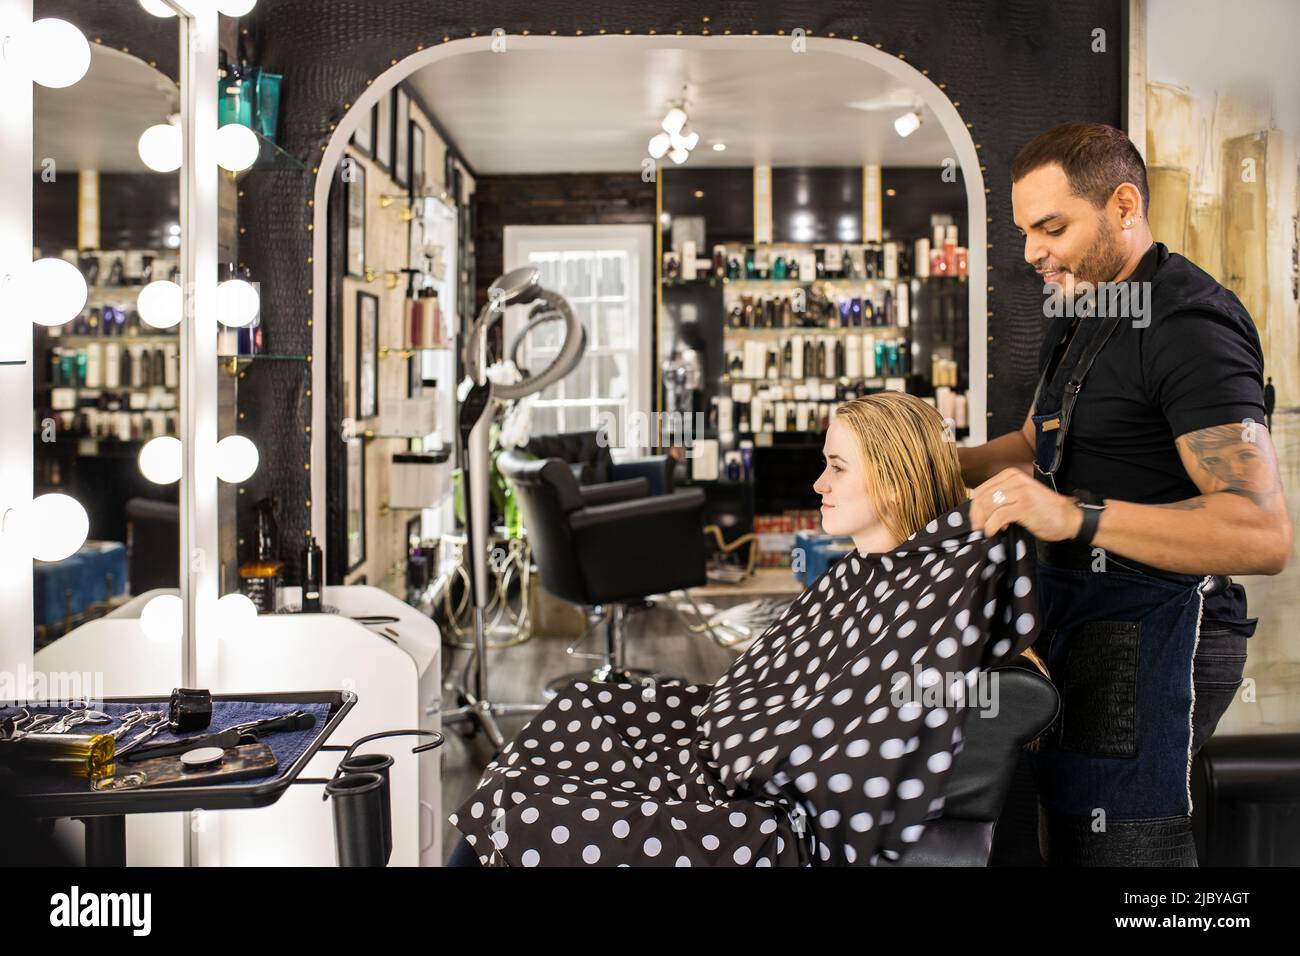 Stylist sitting young woman in chair after washing hair preparing for haircut at boutique salon Stock Photo